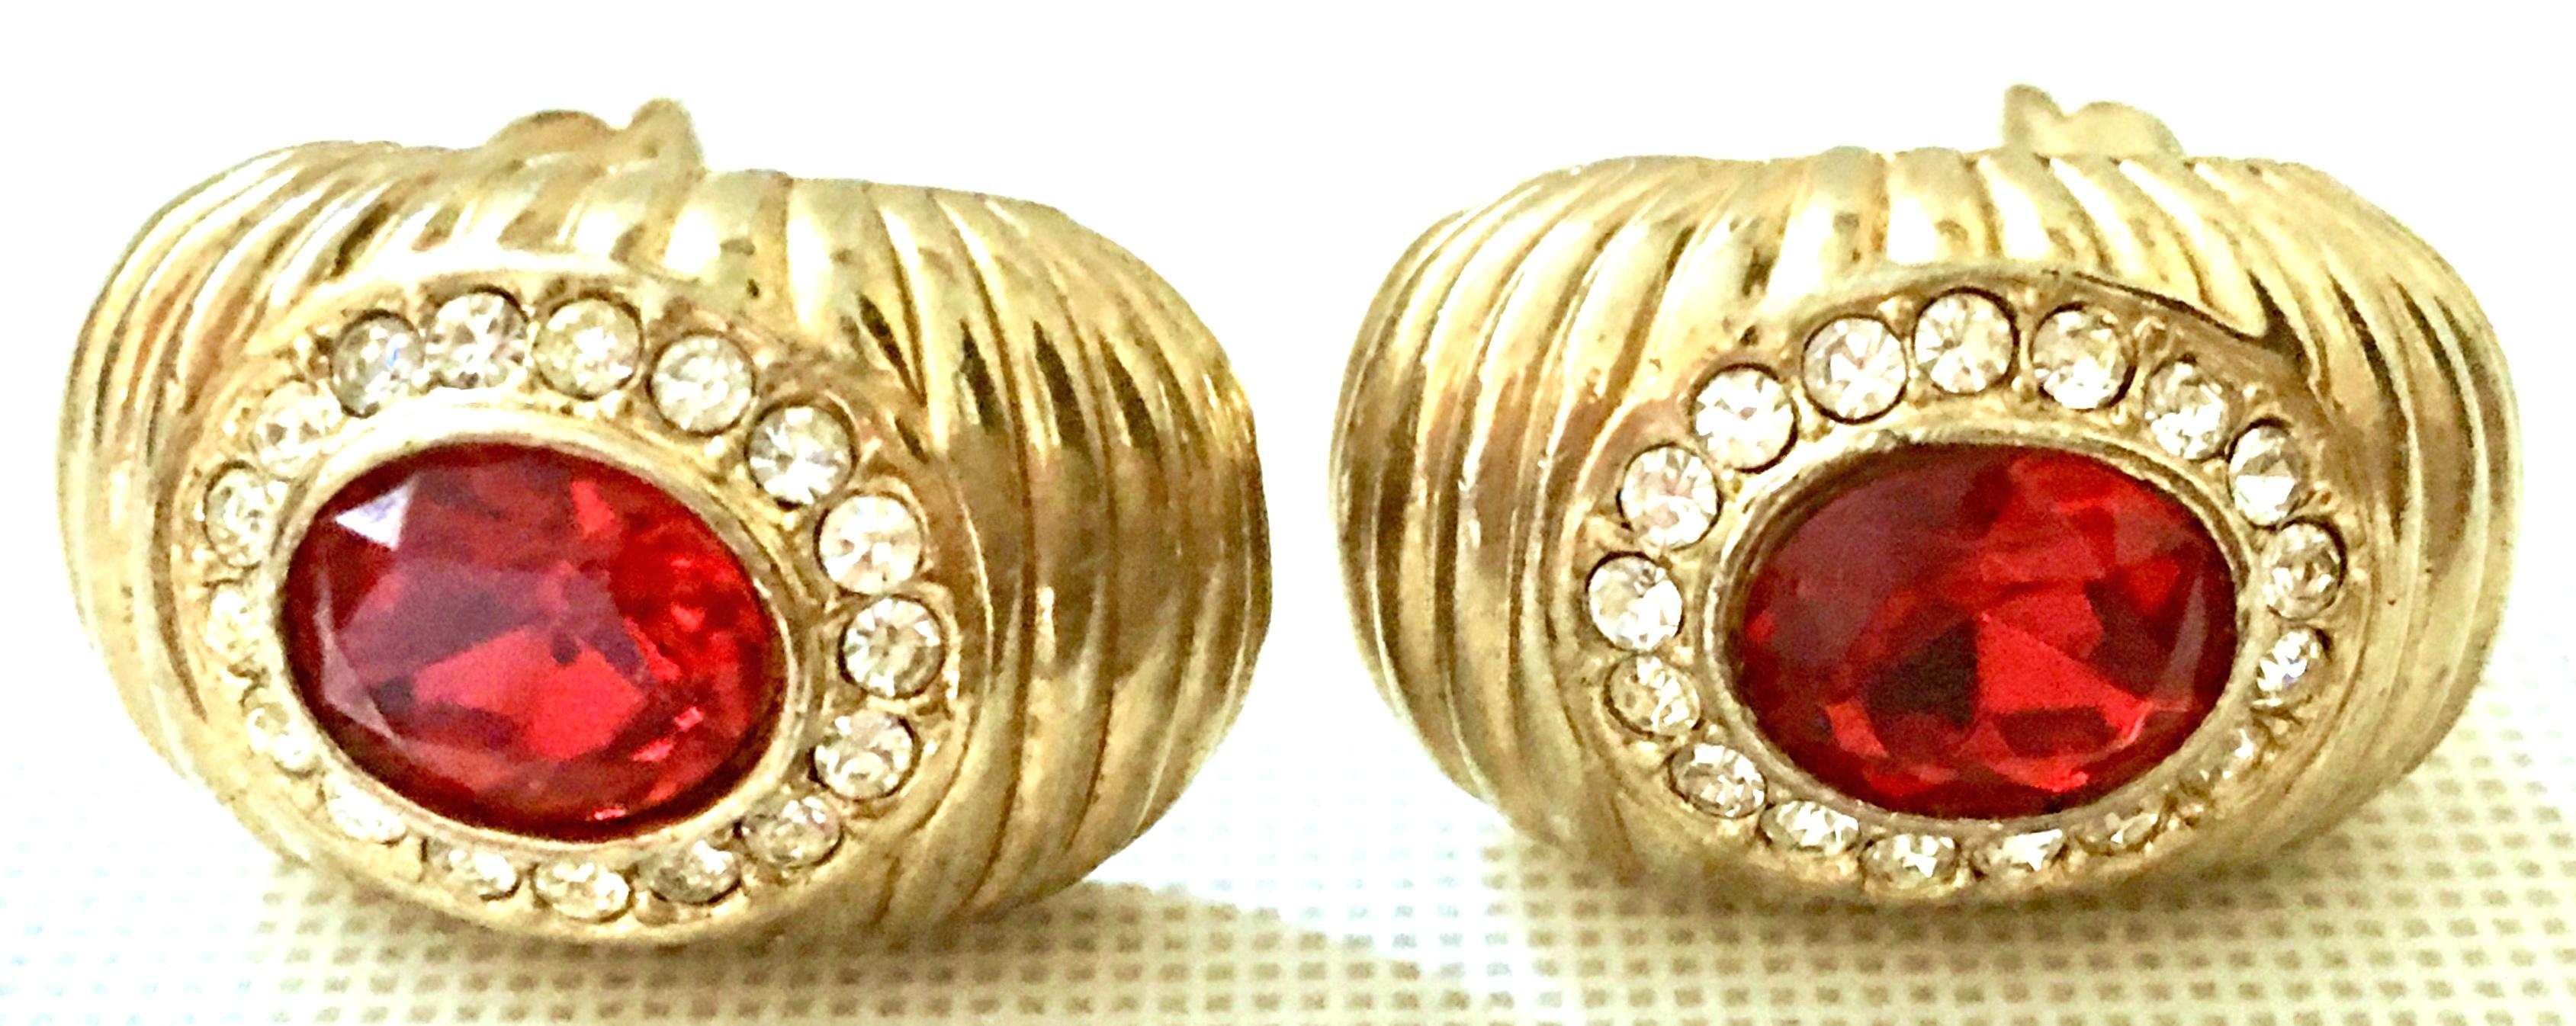 20th Century Gold & Swarovski Cry stal Earrings By, Christian Dior For Sale 1